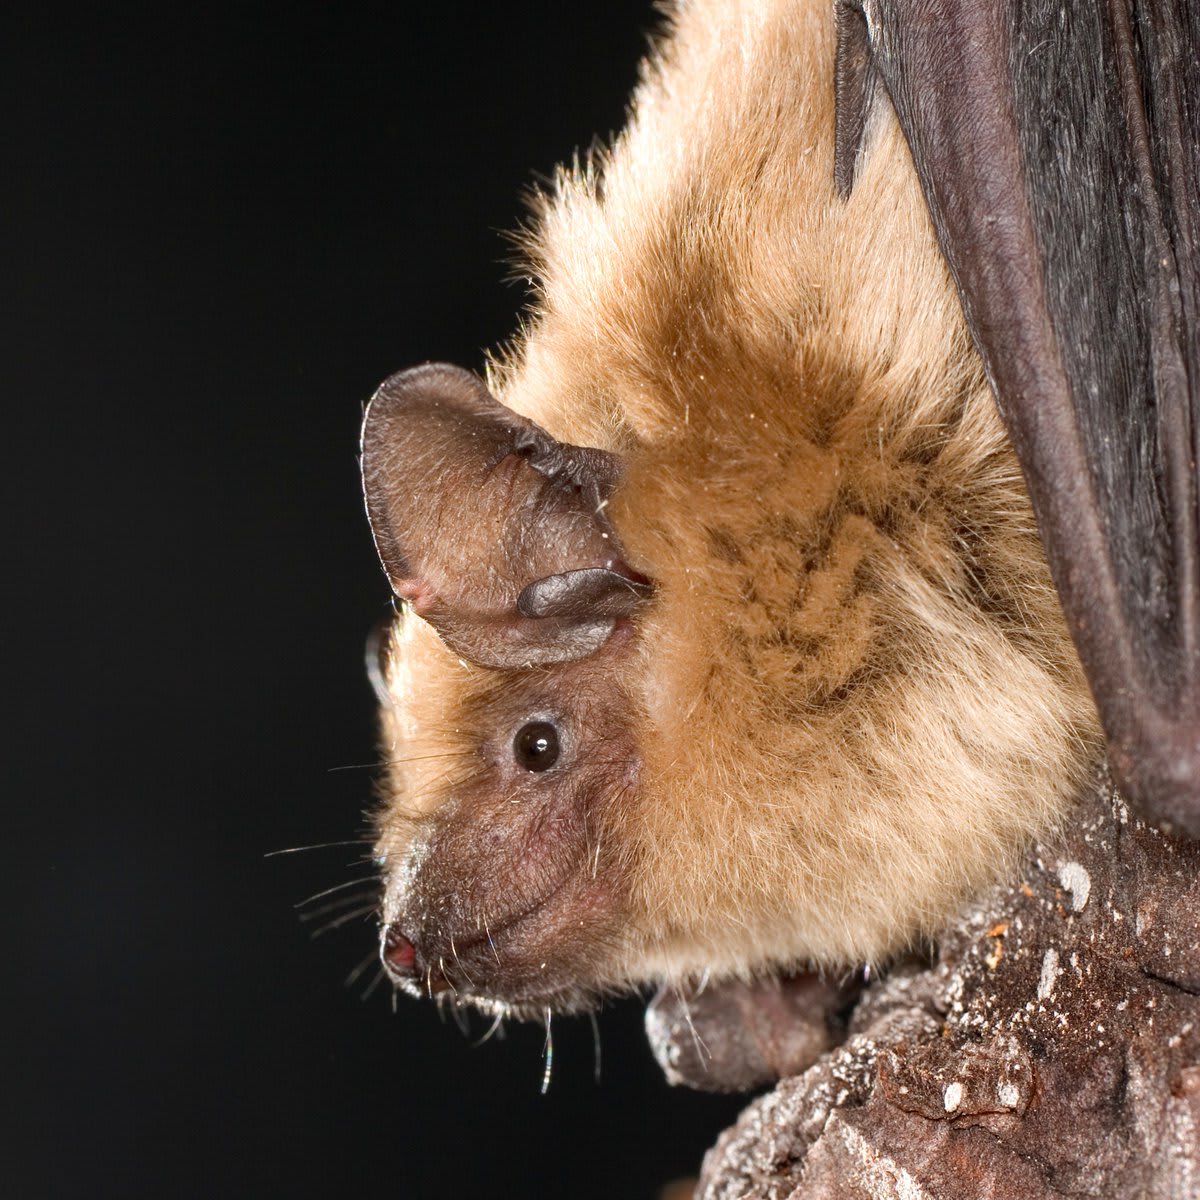 Researchers have finally found a weakness in "the Destroyer"—a fungus that's killed millions of bats since it emerged in '06. But can they exploit it? @bioGraphic on new breakthroughs in a fight that once seemed unwinnable: https://t.co/aonujkARdl. / 📷